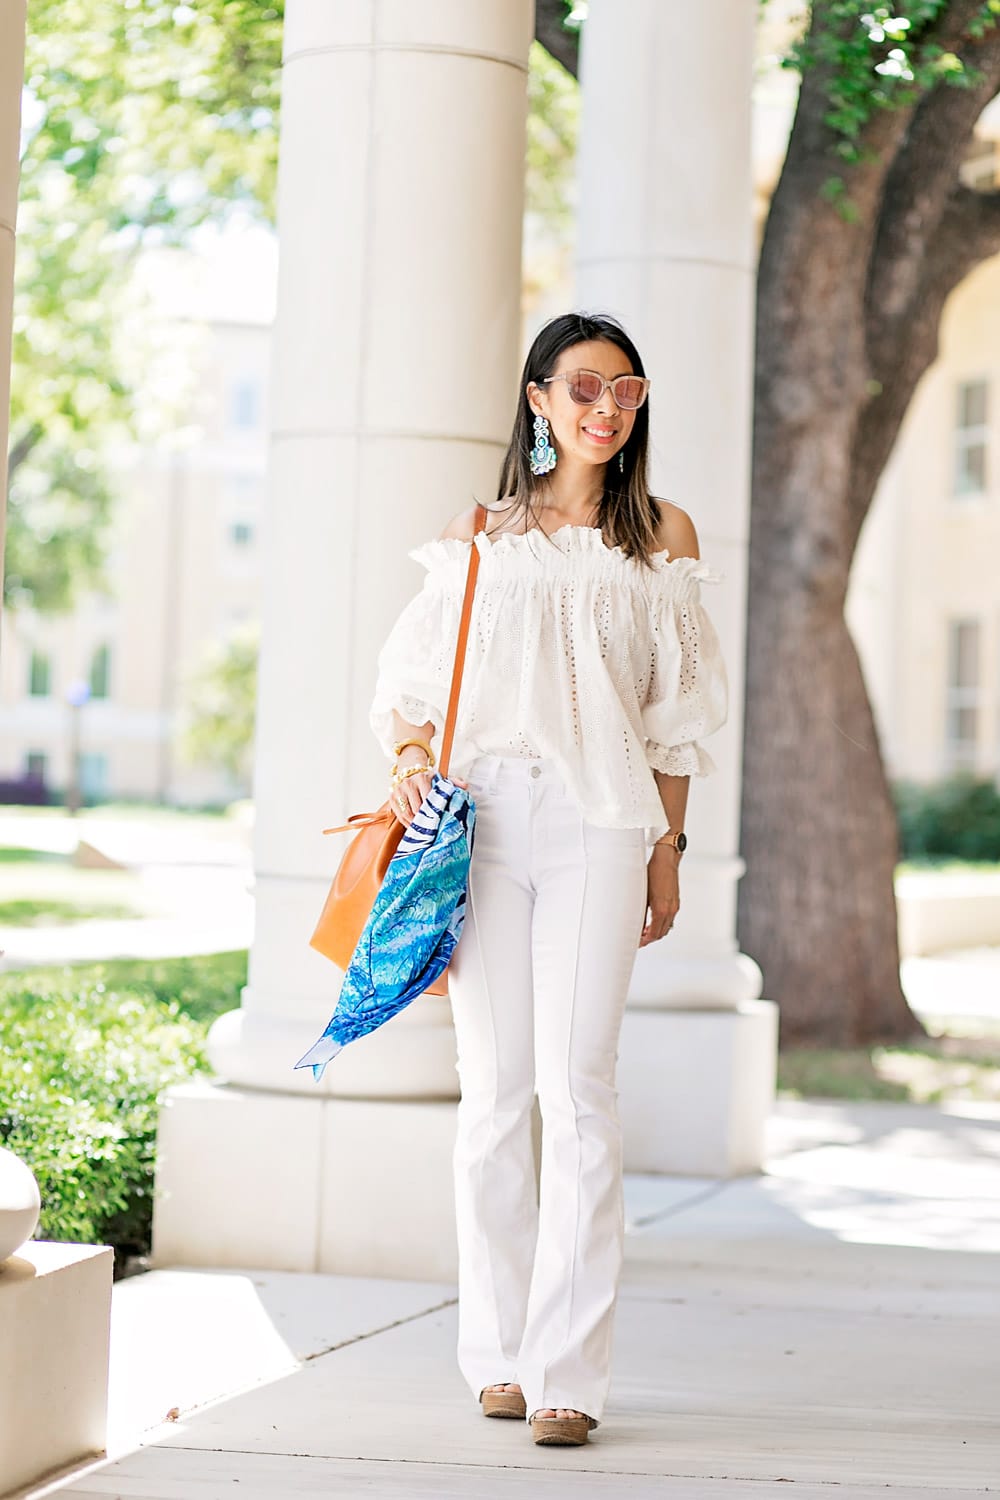 endless rose eyelet off the shoulder top with Alejandra Aspillaga statement earrings and mansur gavriel bucket bag, spring all white outfit idea